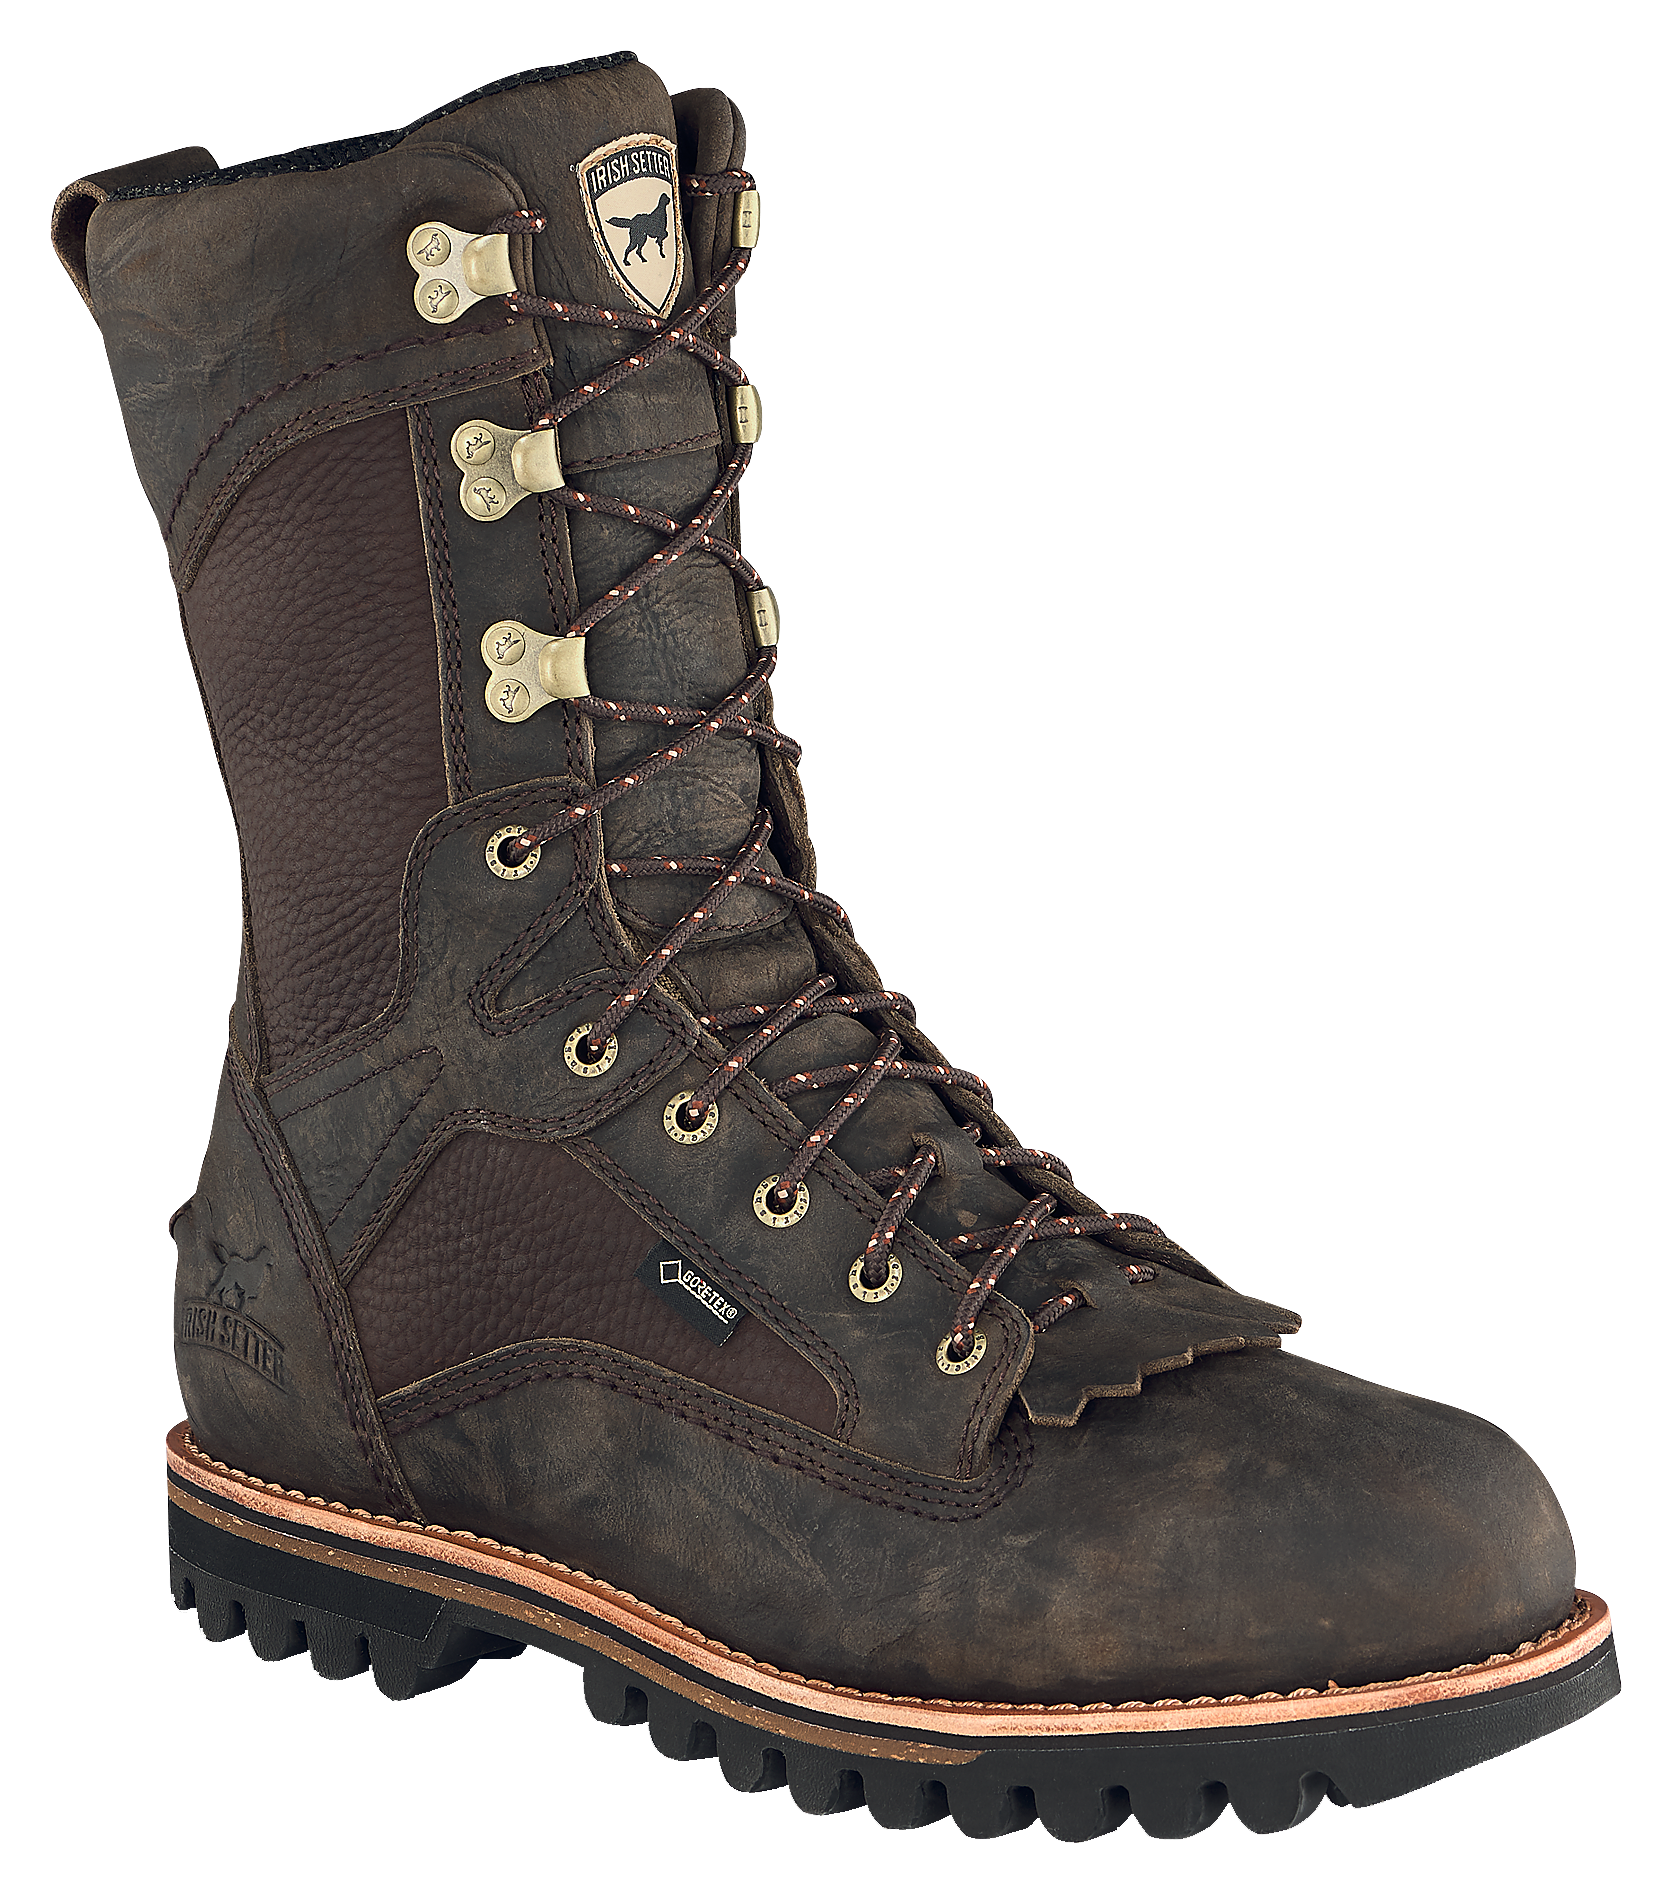 Irish Setter Elk Tracker GORE-TEX Insulated Hunting Boots for Men - Brown - 9.5W